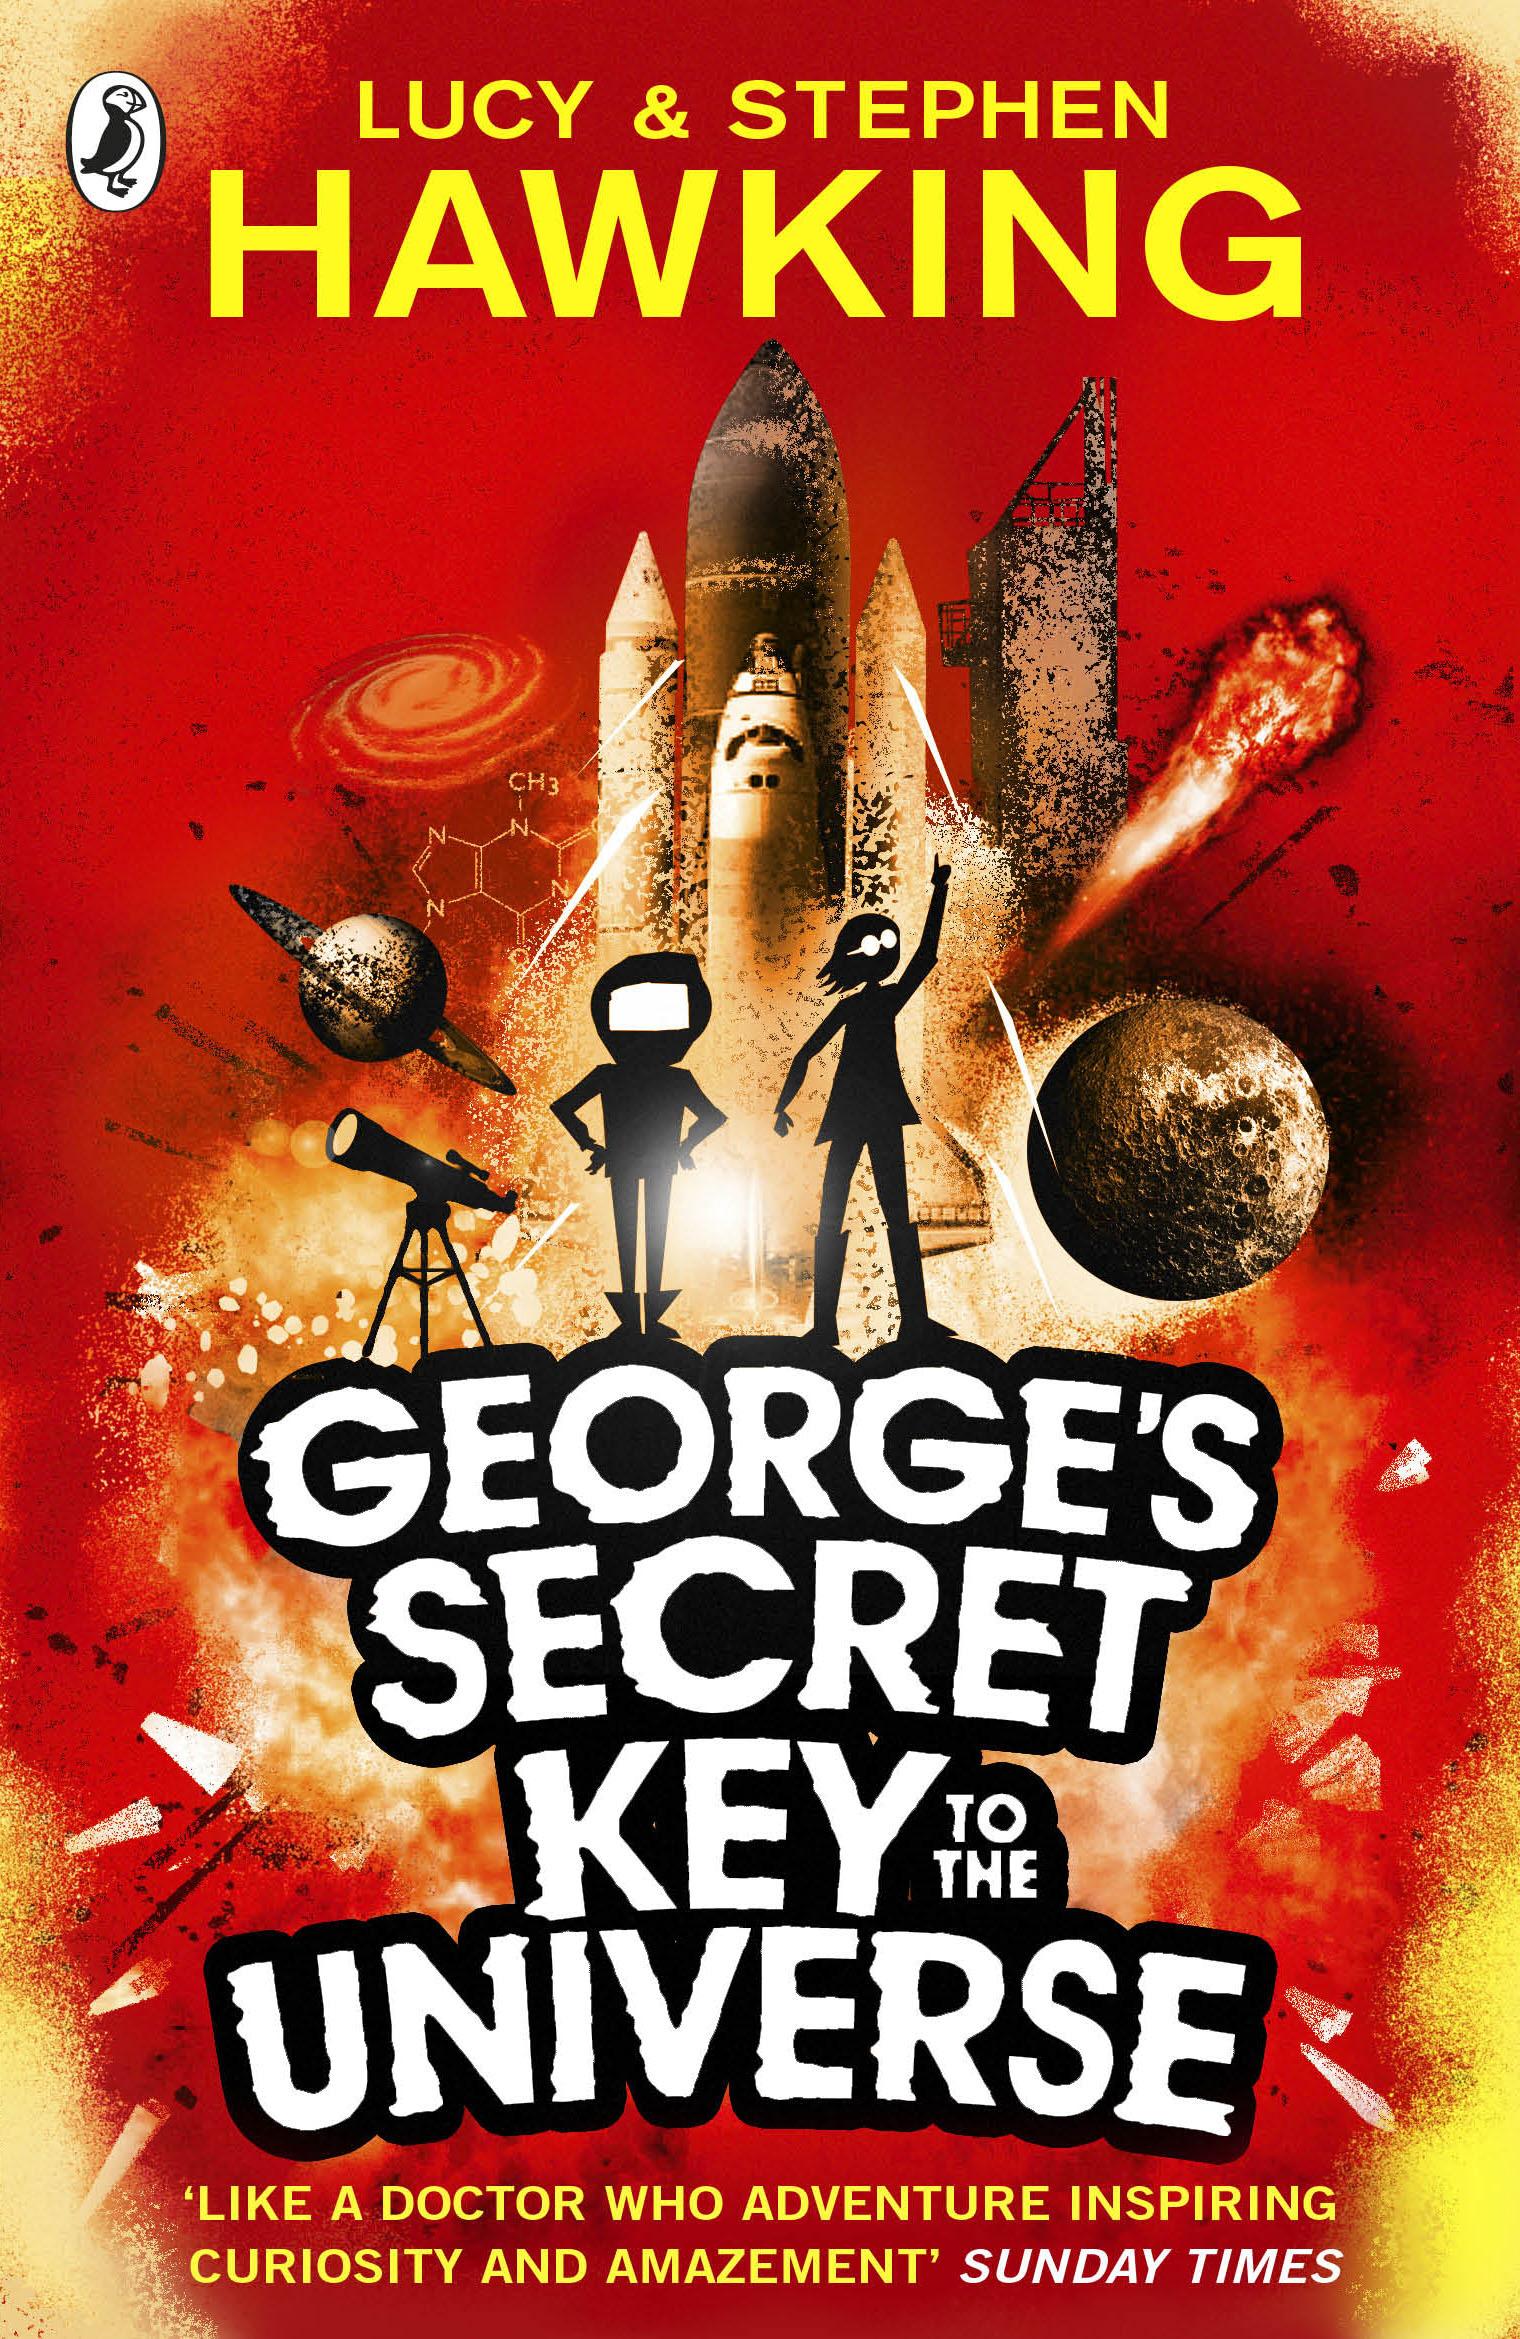 George's Secret Key to the Universe - Lucy Hawking